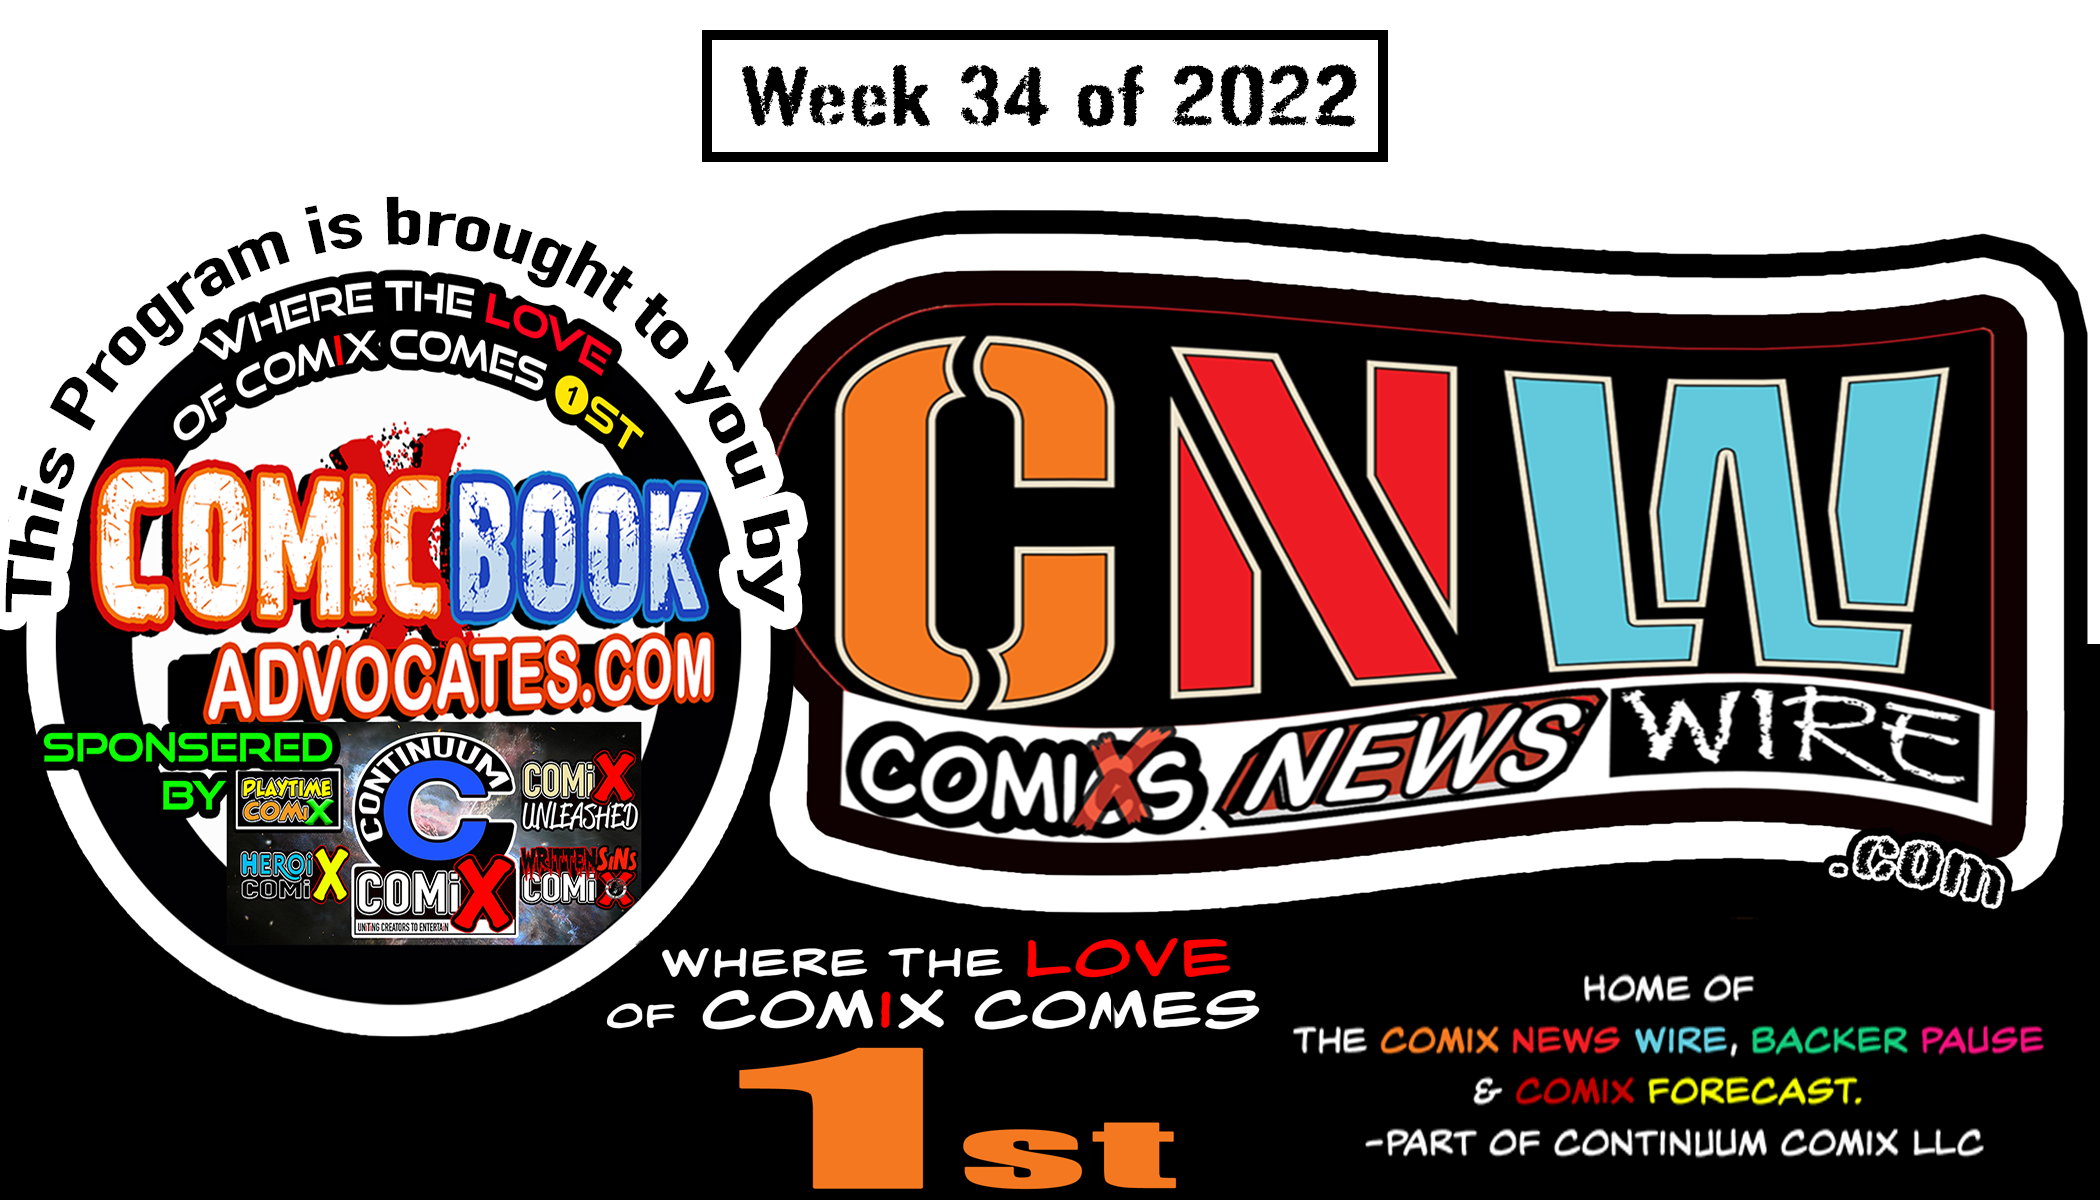 BECOME A COMIC BOOK ADVOCATE-THE COMiX NEWS WiRE: -Wk34of22: 8/22-28/22